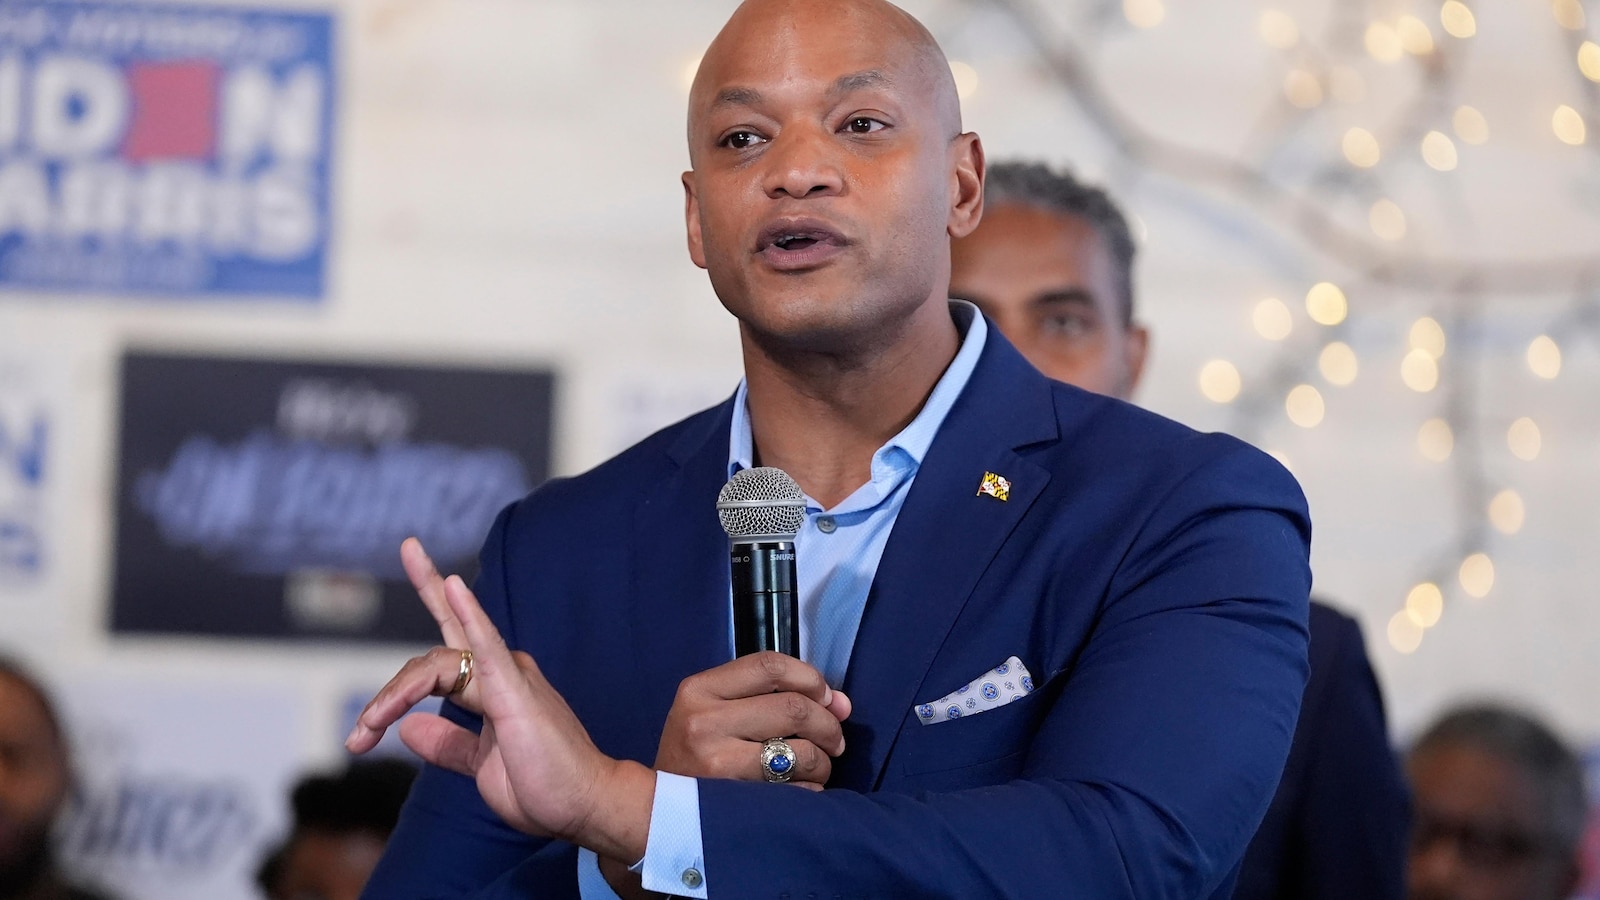 Maryland Governor Wes Moore to Grant 175,000 Pardons for Marijuana Convictions